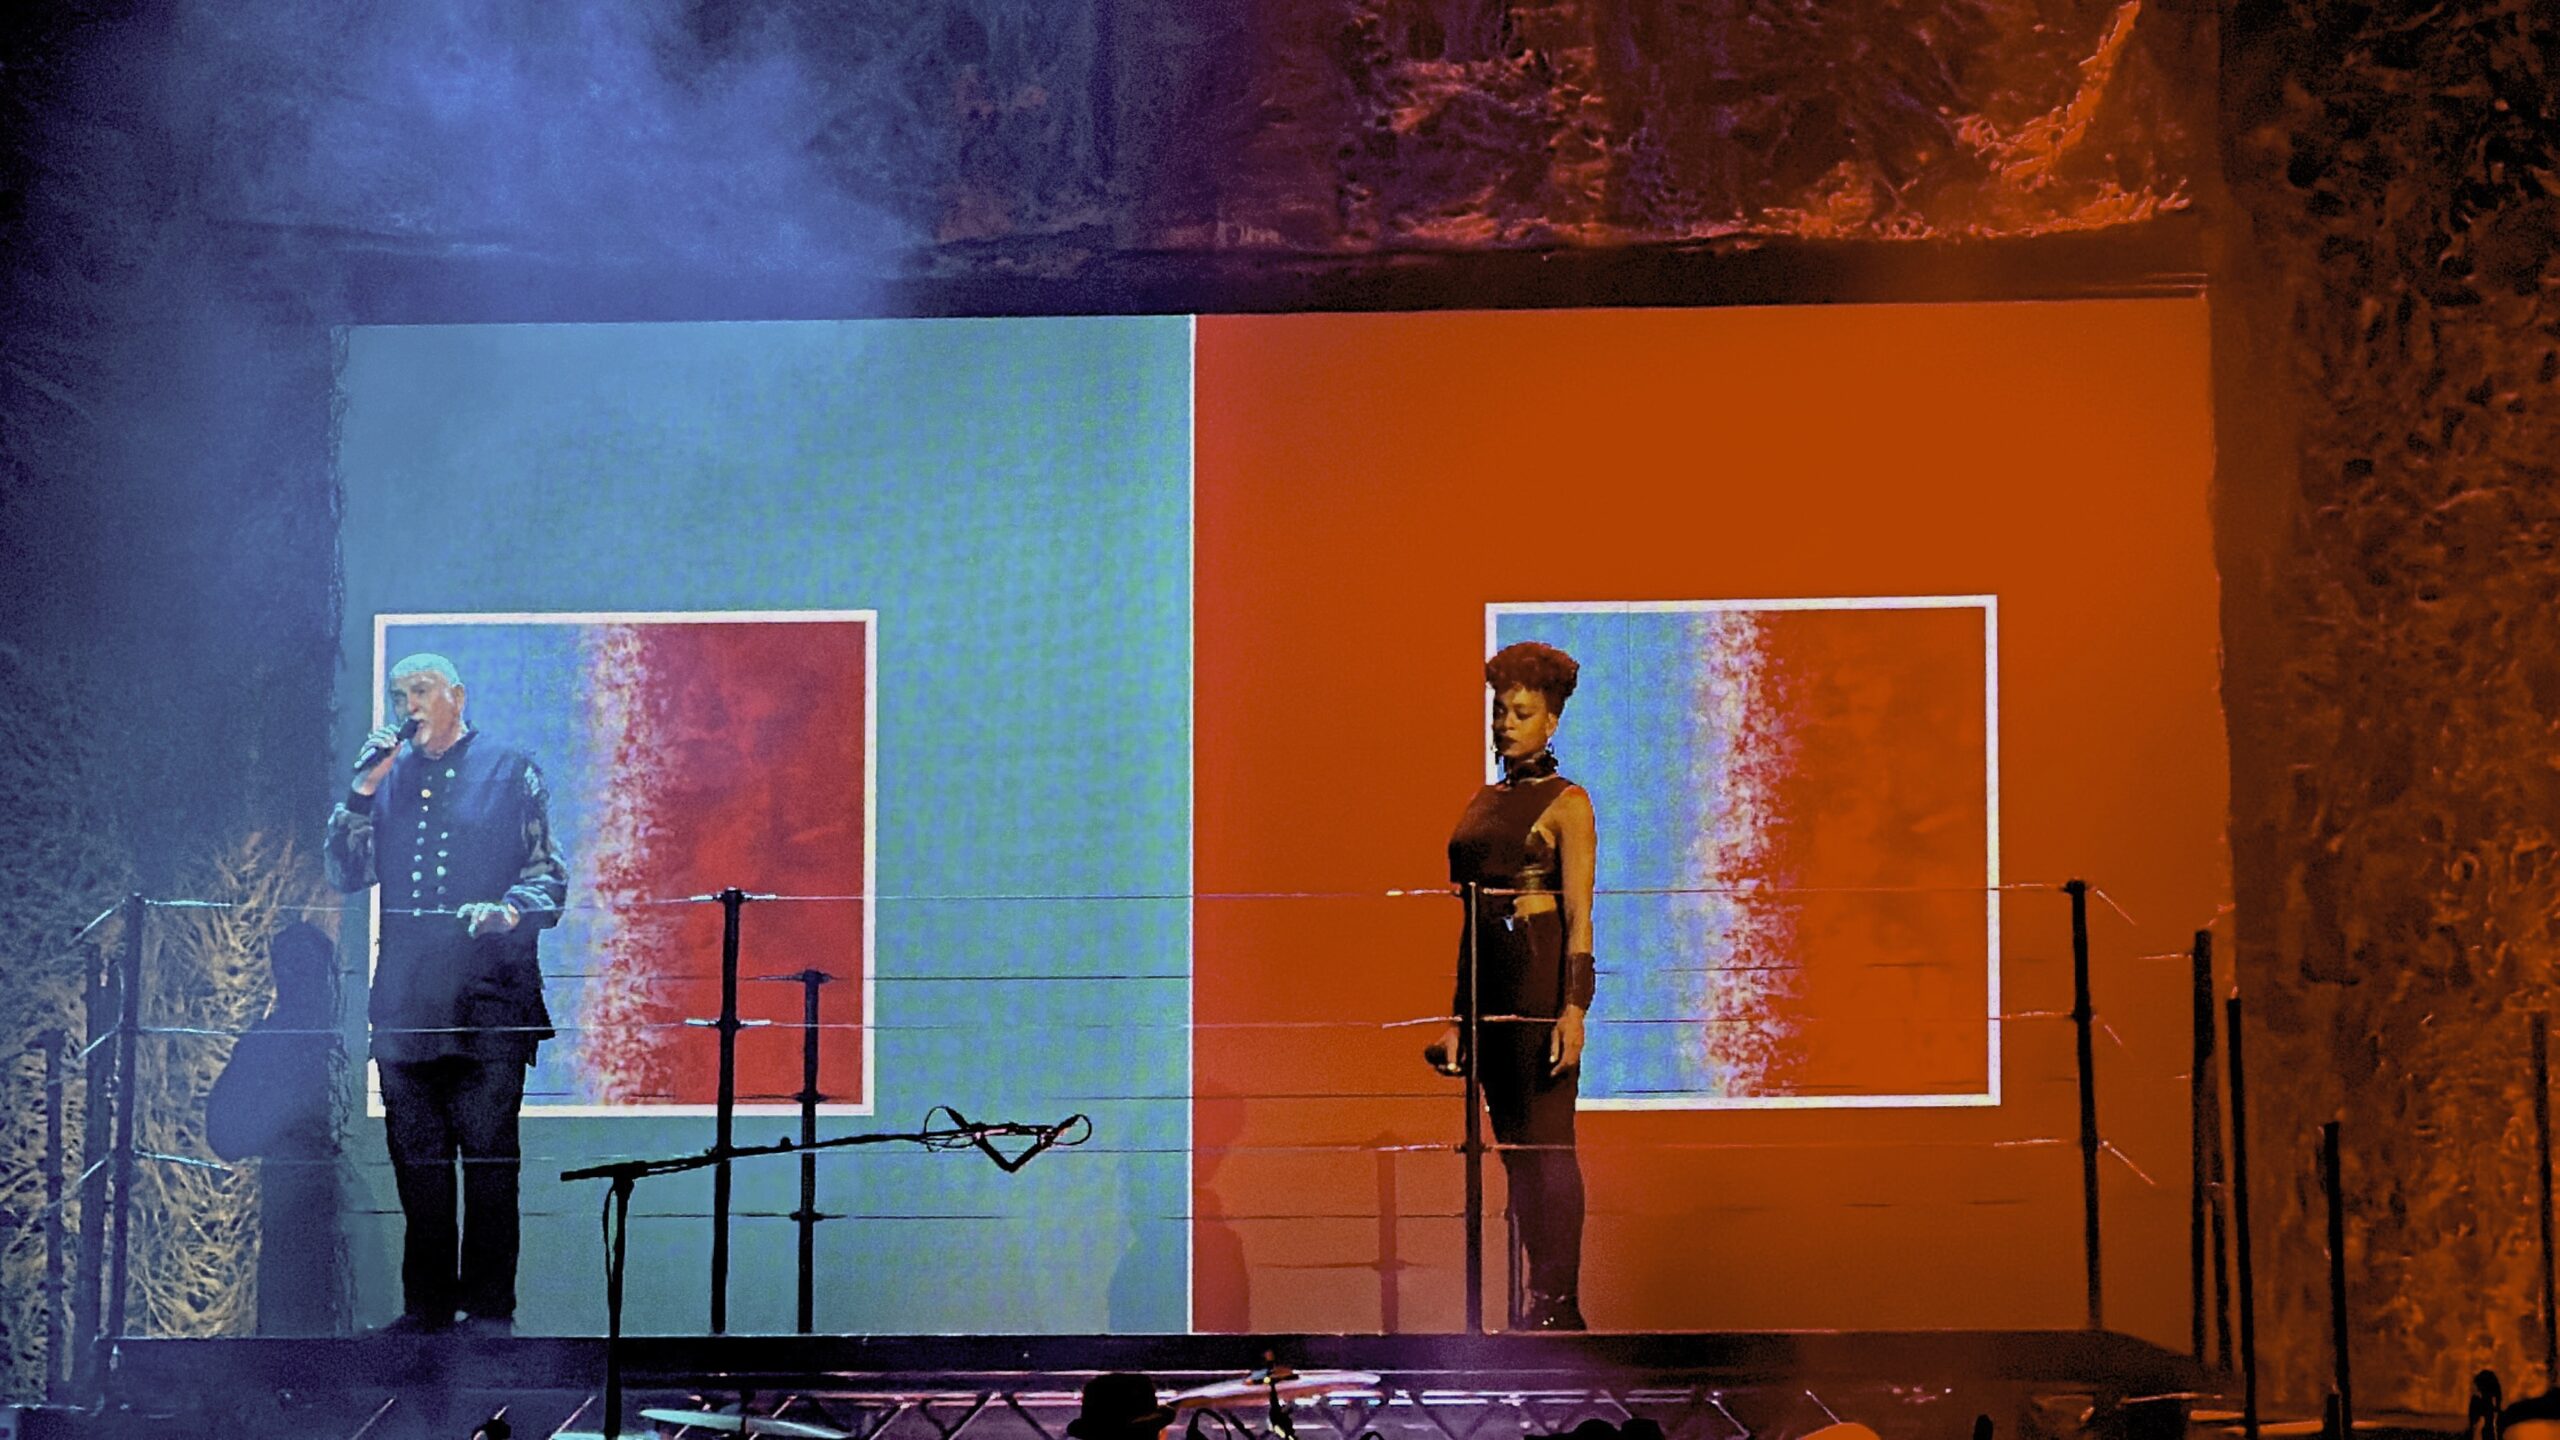 Review: PETER GABRIEL I/O TOUR at Nationwide Area